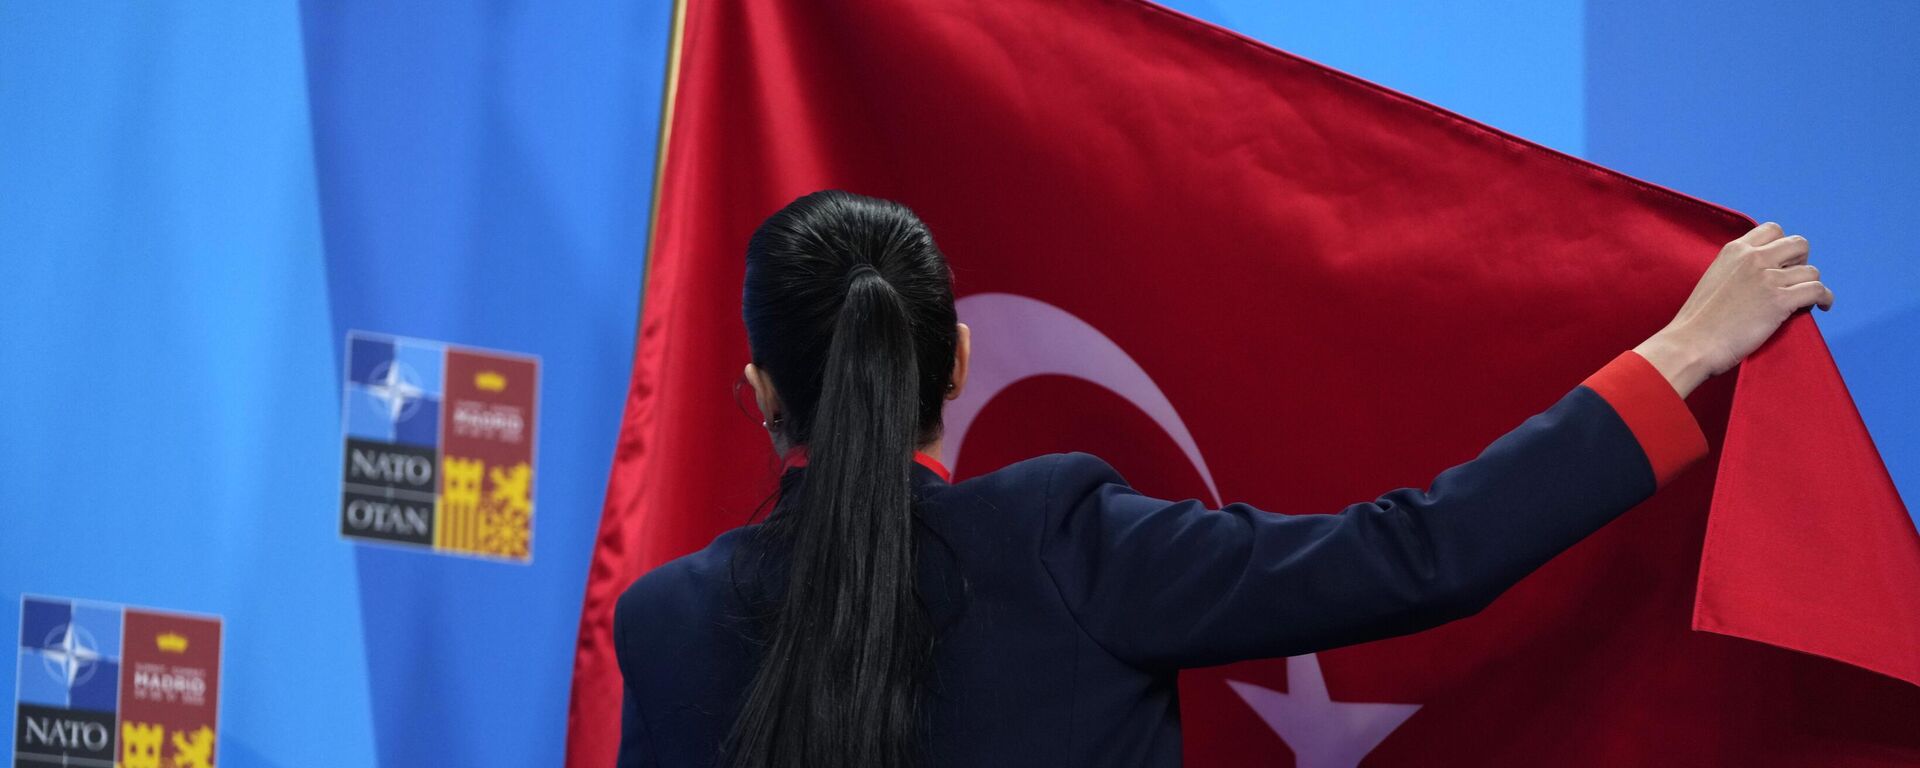 A member of the Turkish delegation adjusts the flag prior to an address by Turkish President Recep Tayyip Erdogan at a NATO summit in Madrid, Spain  - Sputnik International, 1920, 25.01.2023